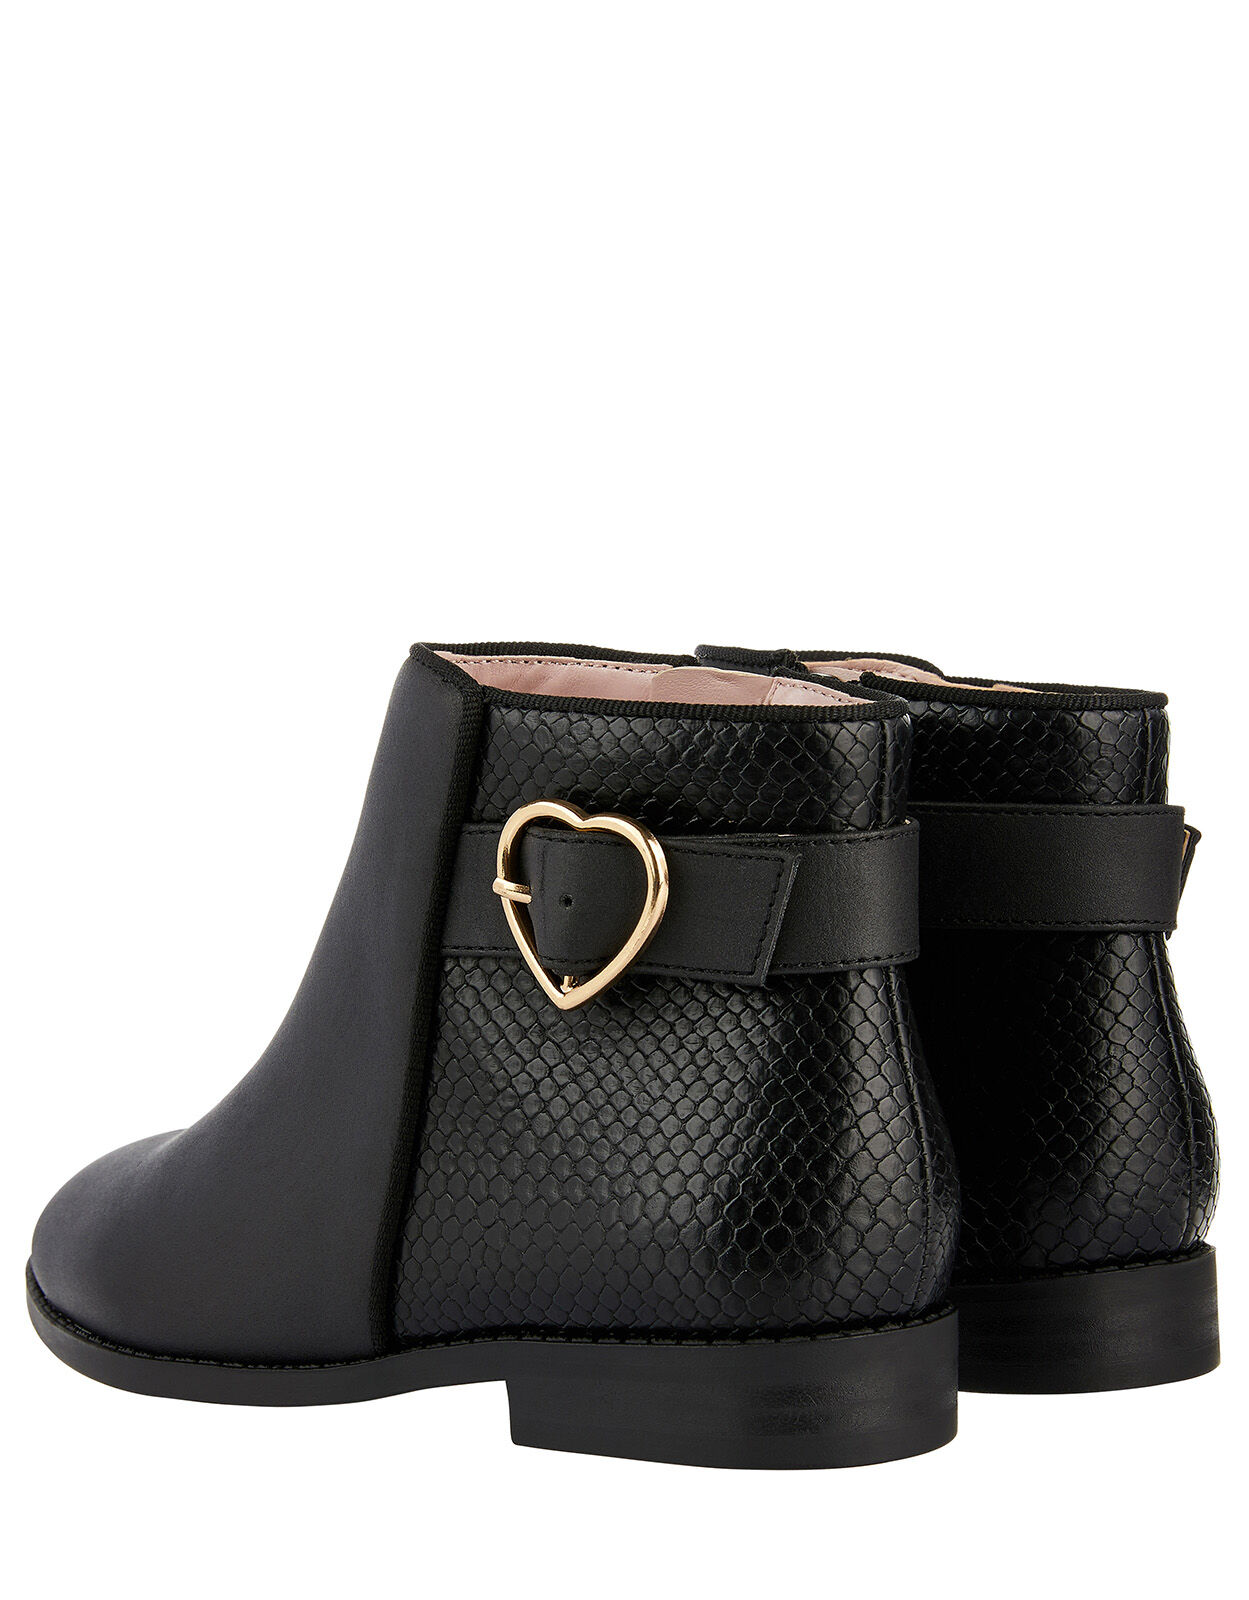 black ankle boots uk